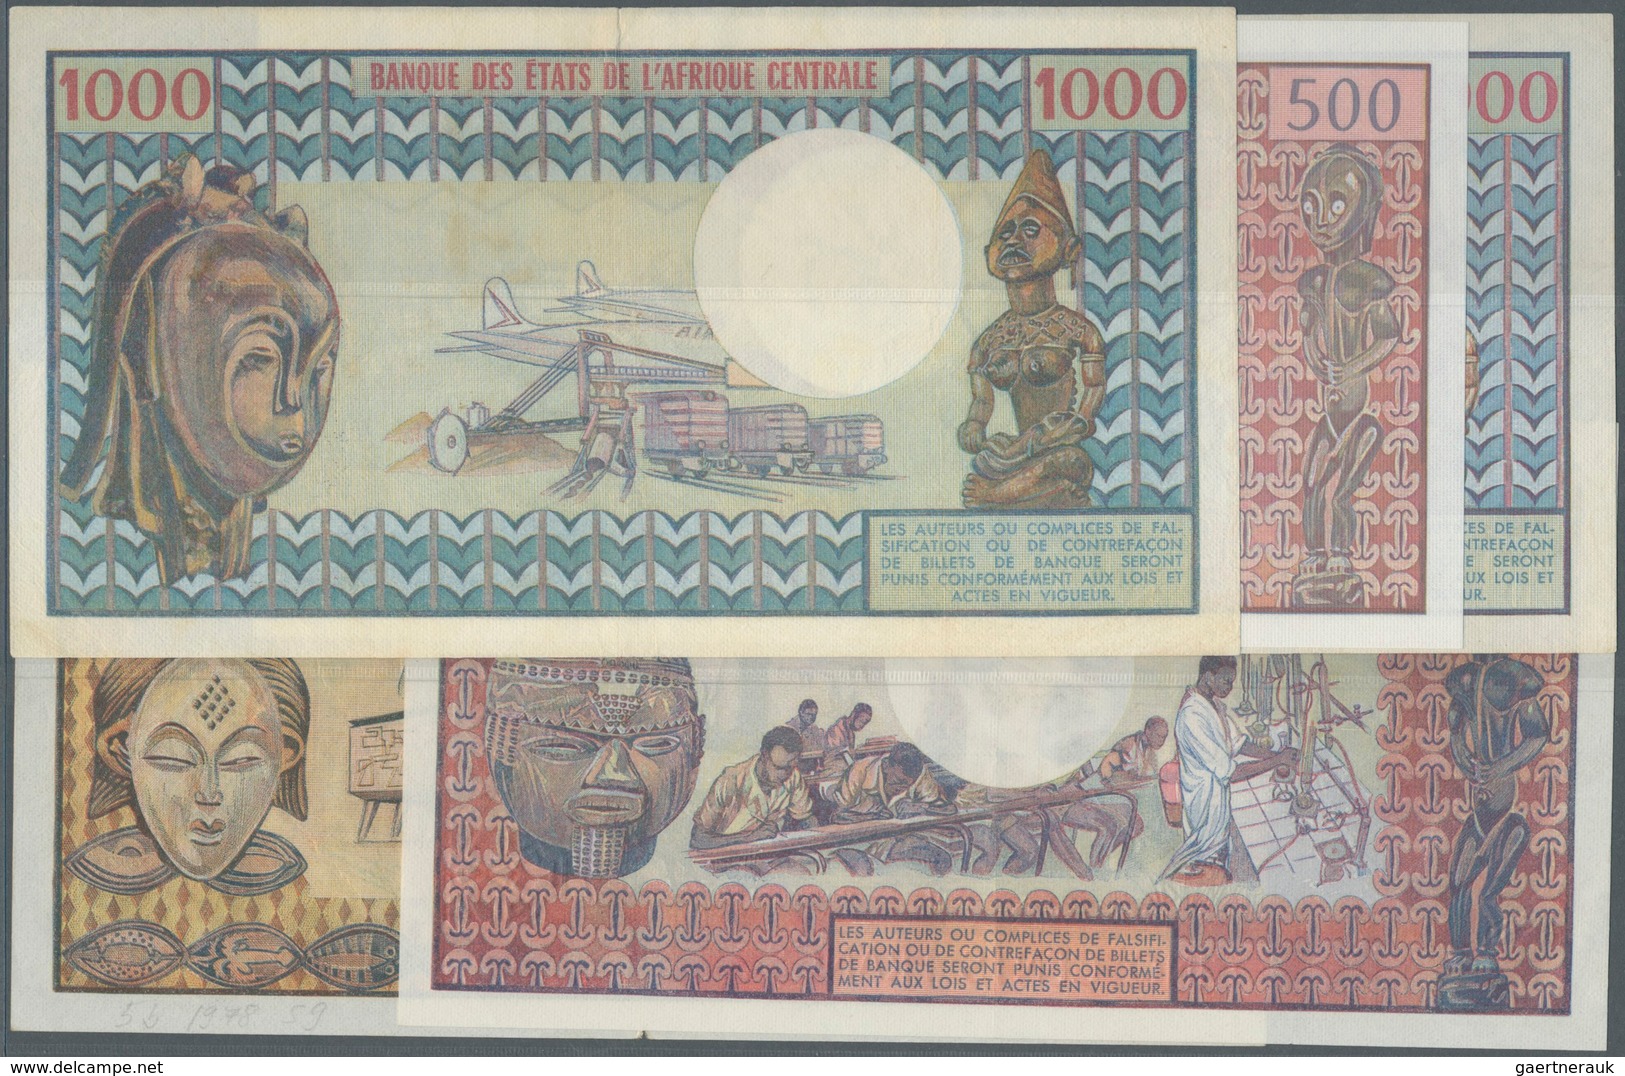 01284 Chad / Tschad: Republique Du Tchad, Set With 5 Banknotes Comprising 500 Francs 1970's P.2a In UNC, 1 - Chad